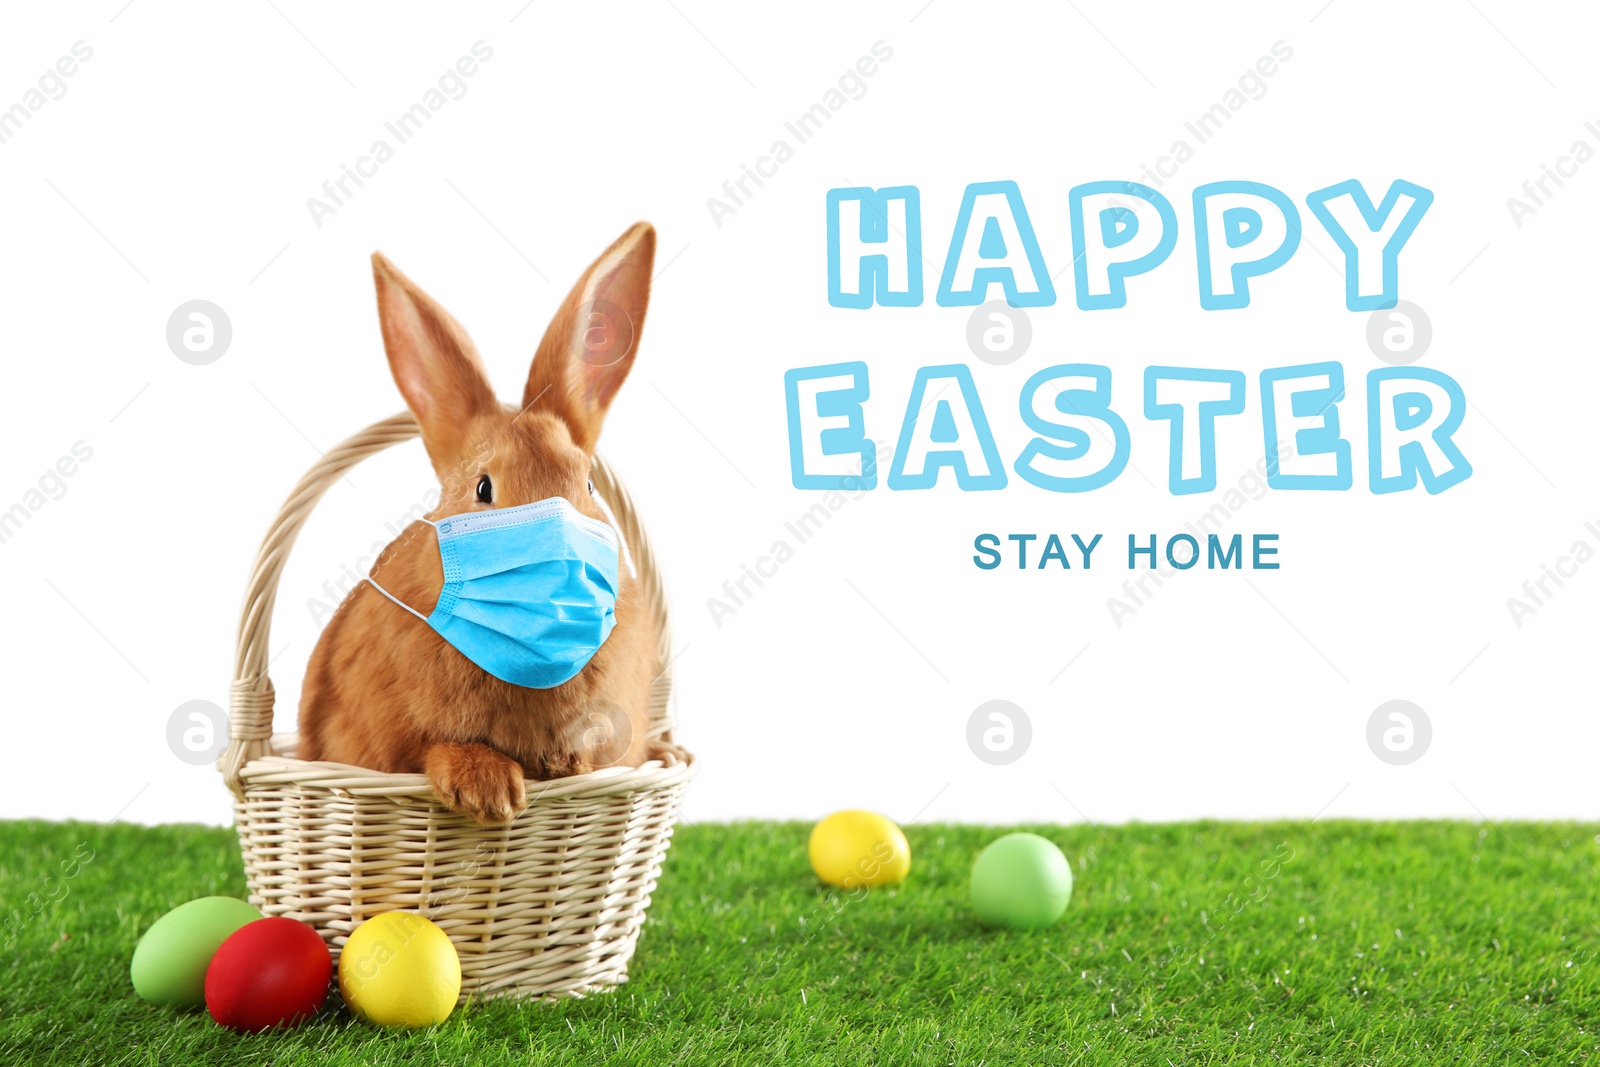 Image of Text Happy Easter Stay Home and cute bunny in protective mask on green grass. Holiday during Covid-19 pandemic